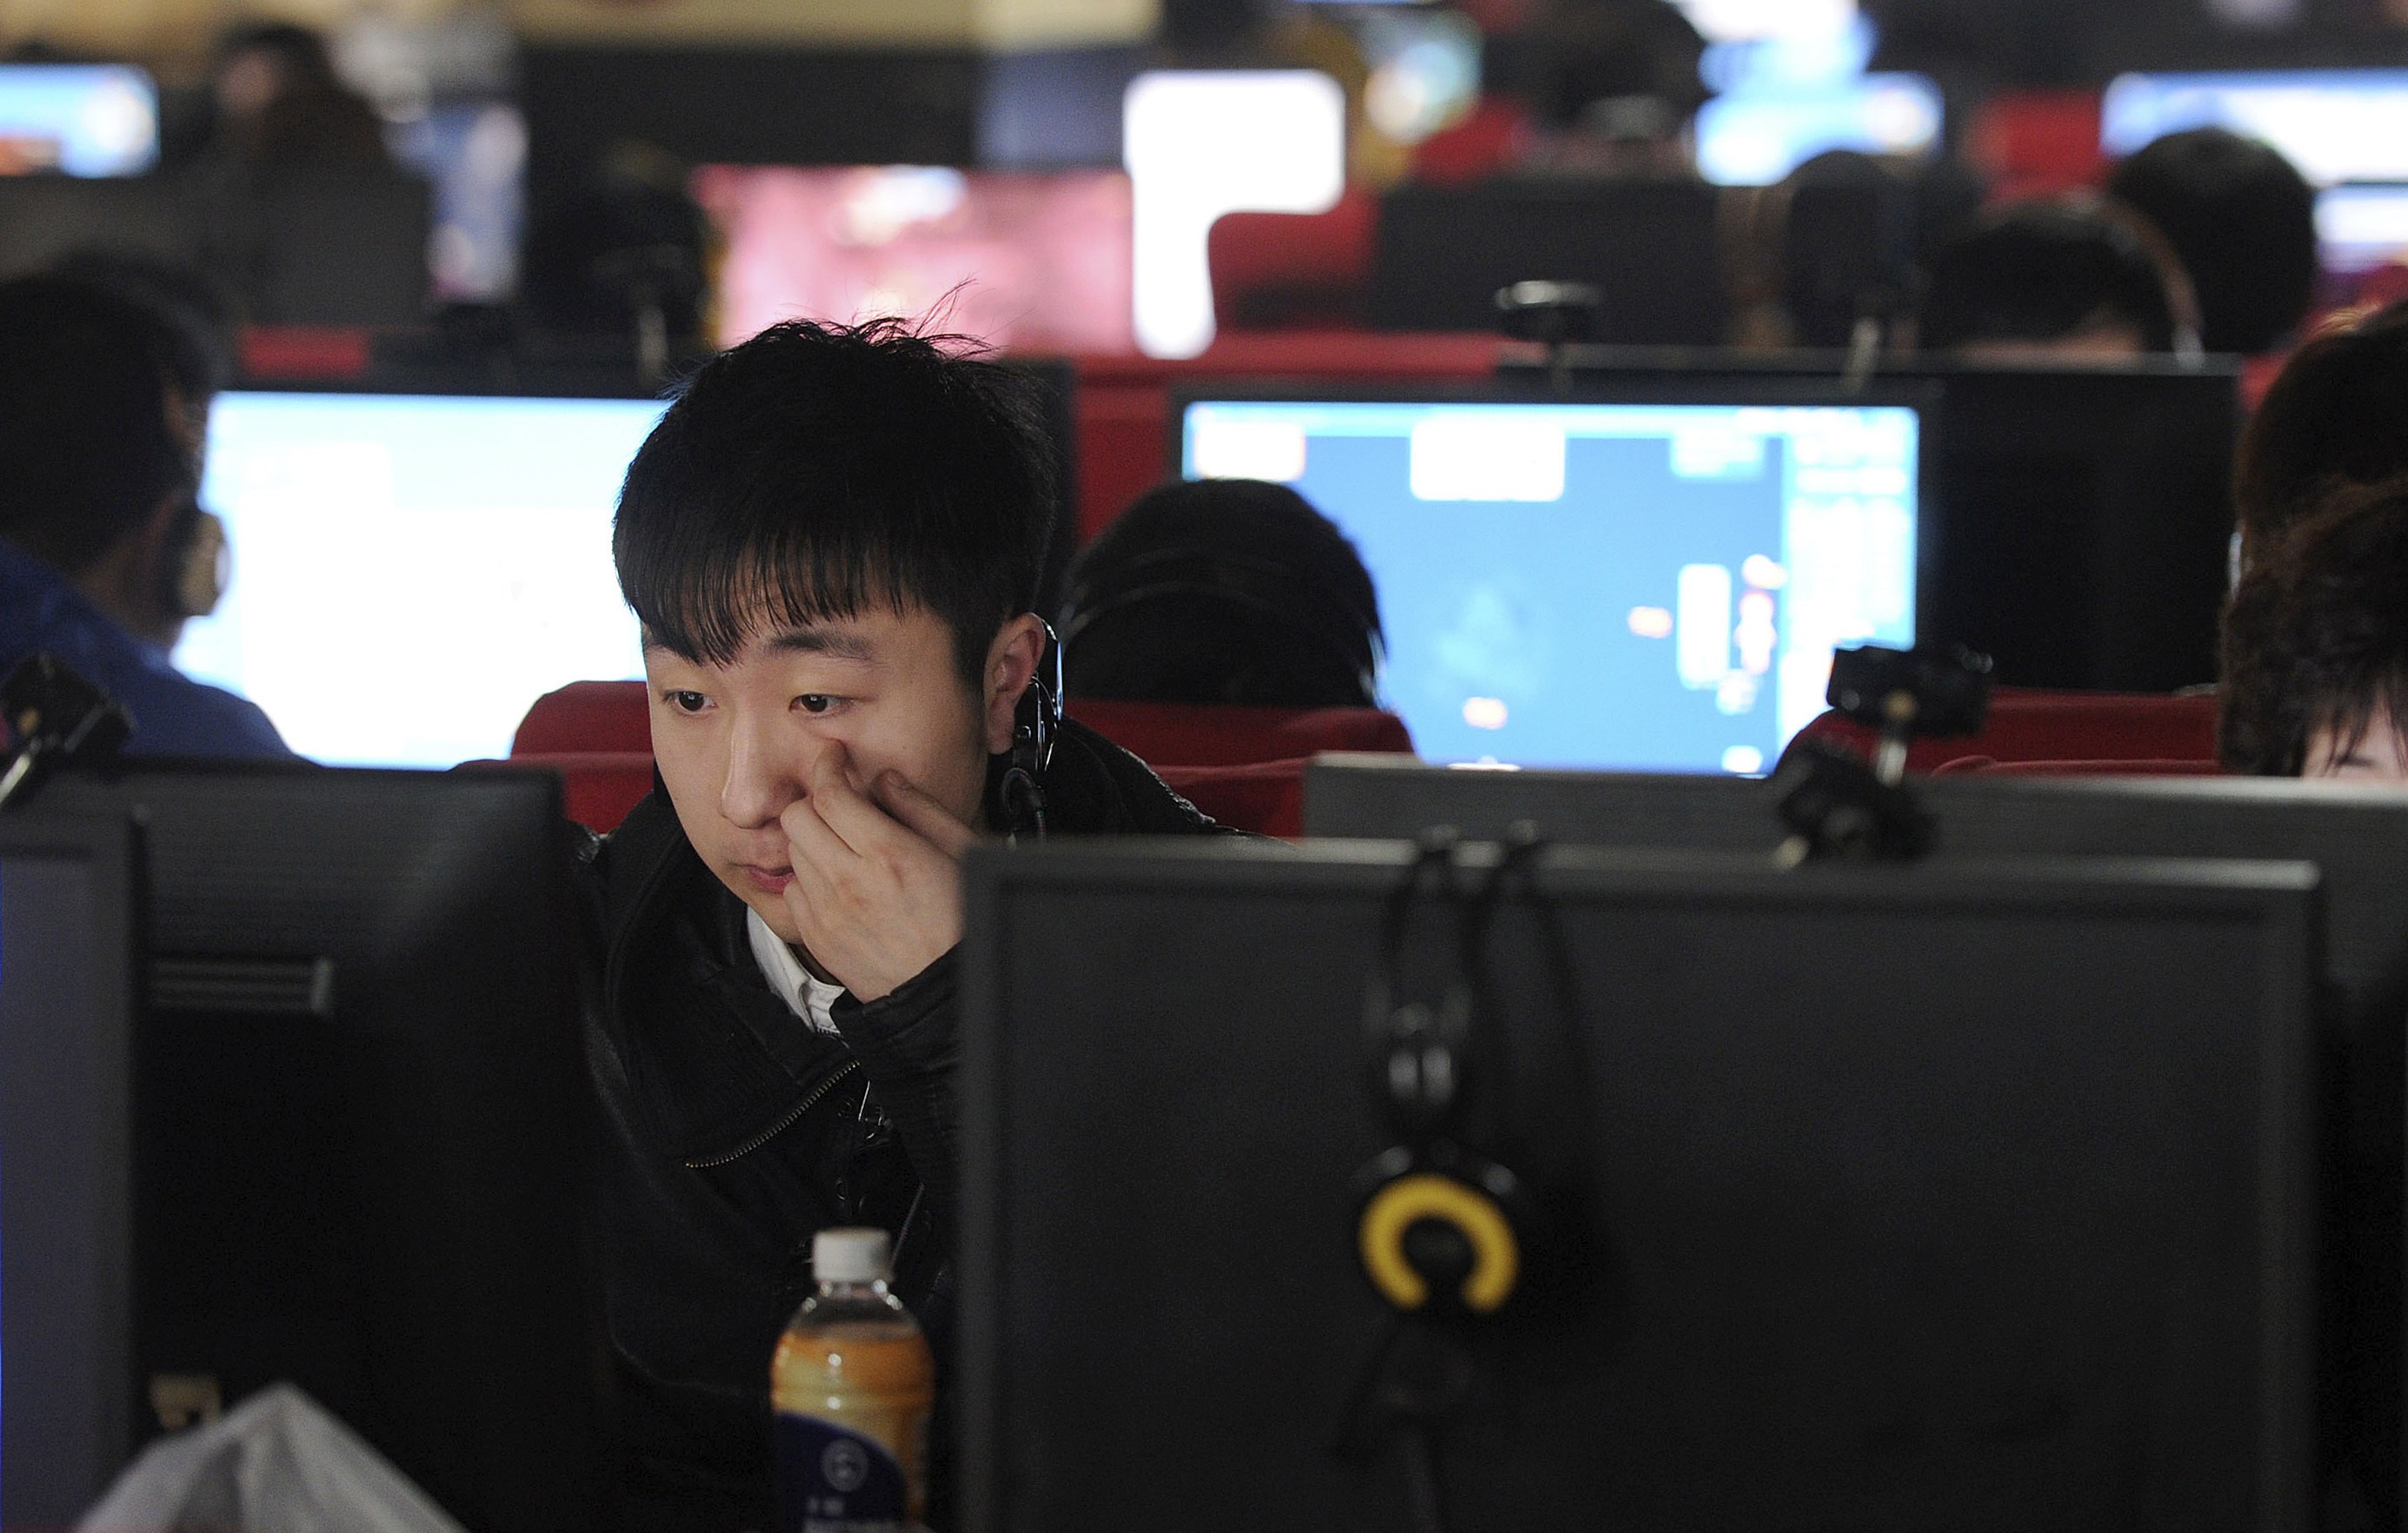 A man uses a computer at an internet cafe in Hefei. Symantec says it has discovered a group of highly sophisticated hackers operating out of China. Photo: Reuters